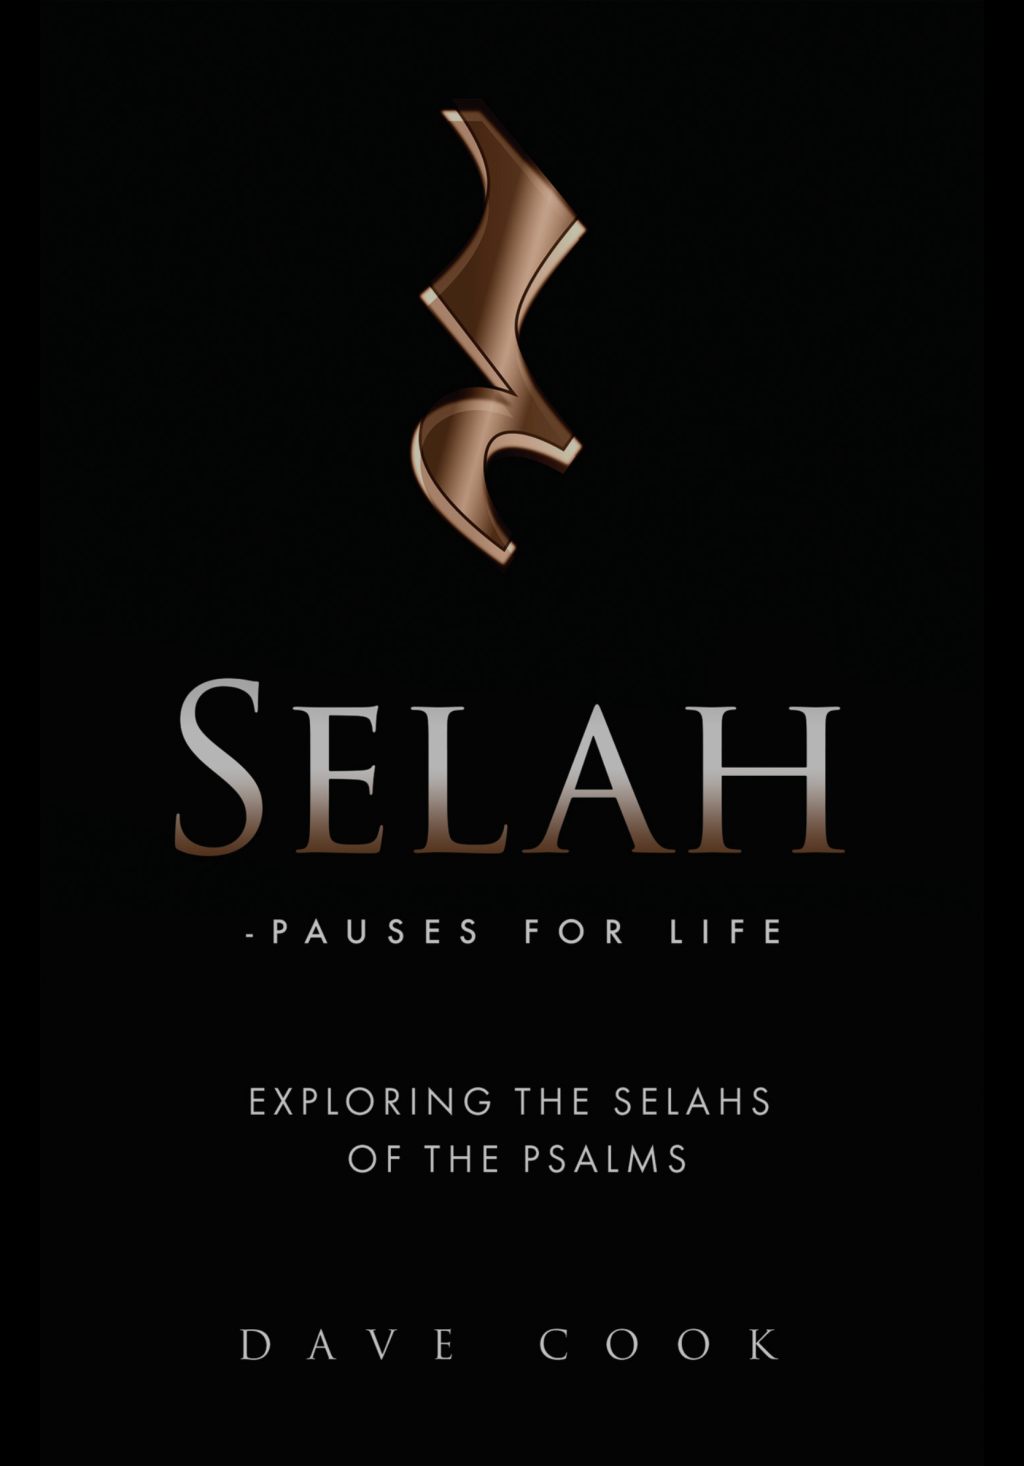 “Selah – Pauses for Life” Paperback Now Available!